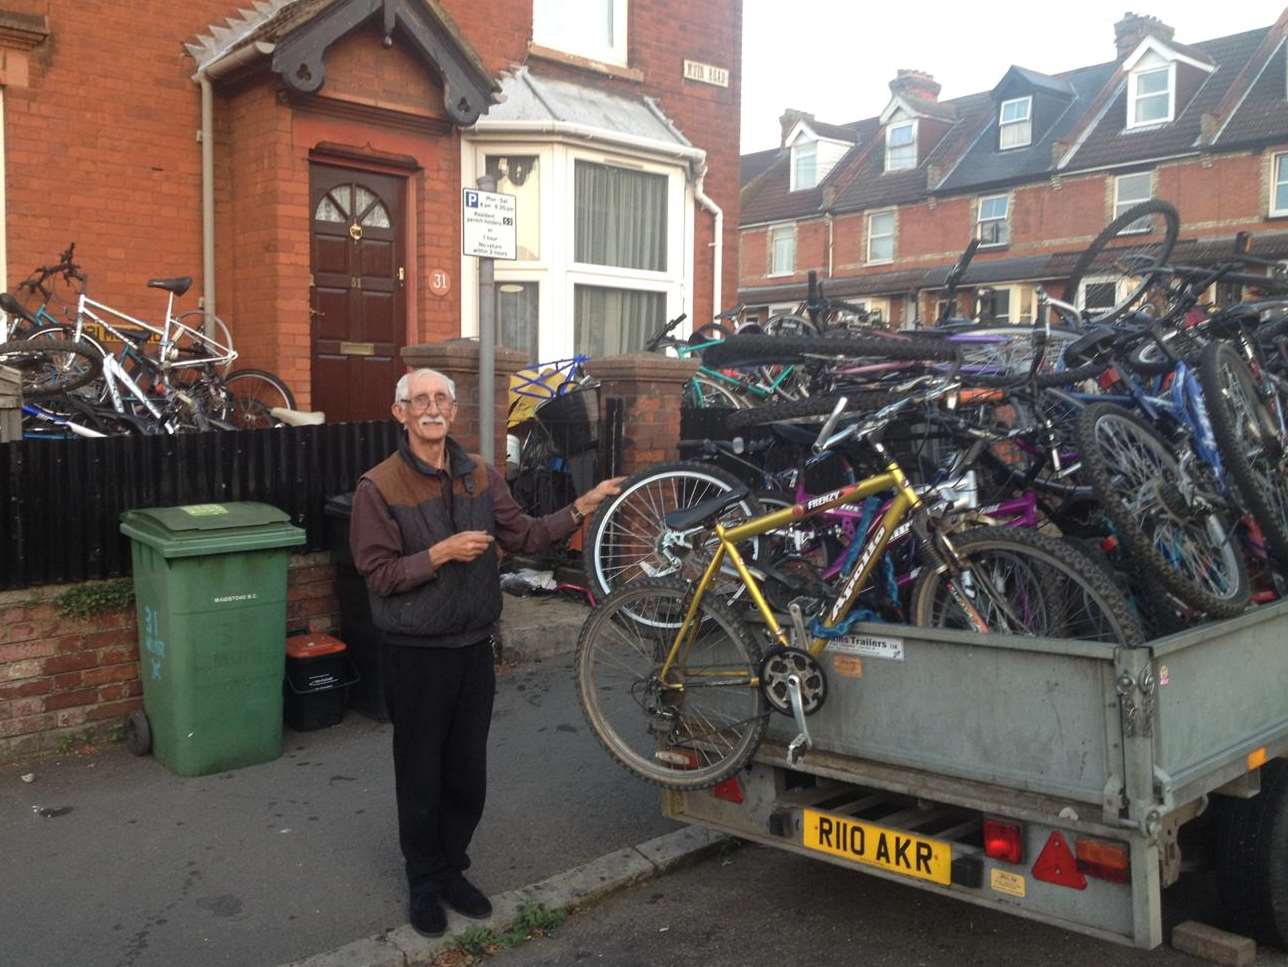 David Watts, 73, next to his collection of bikes that spill out onto the street